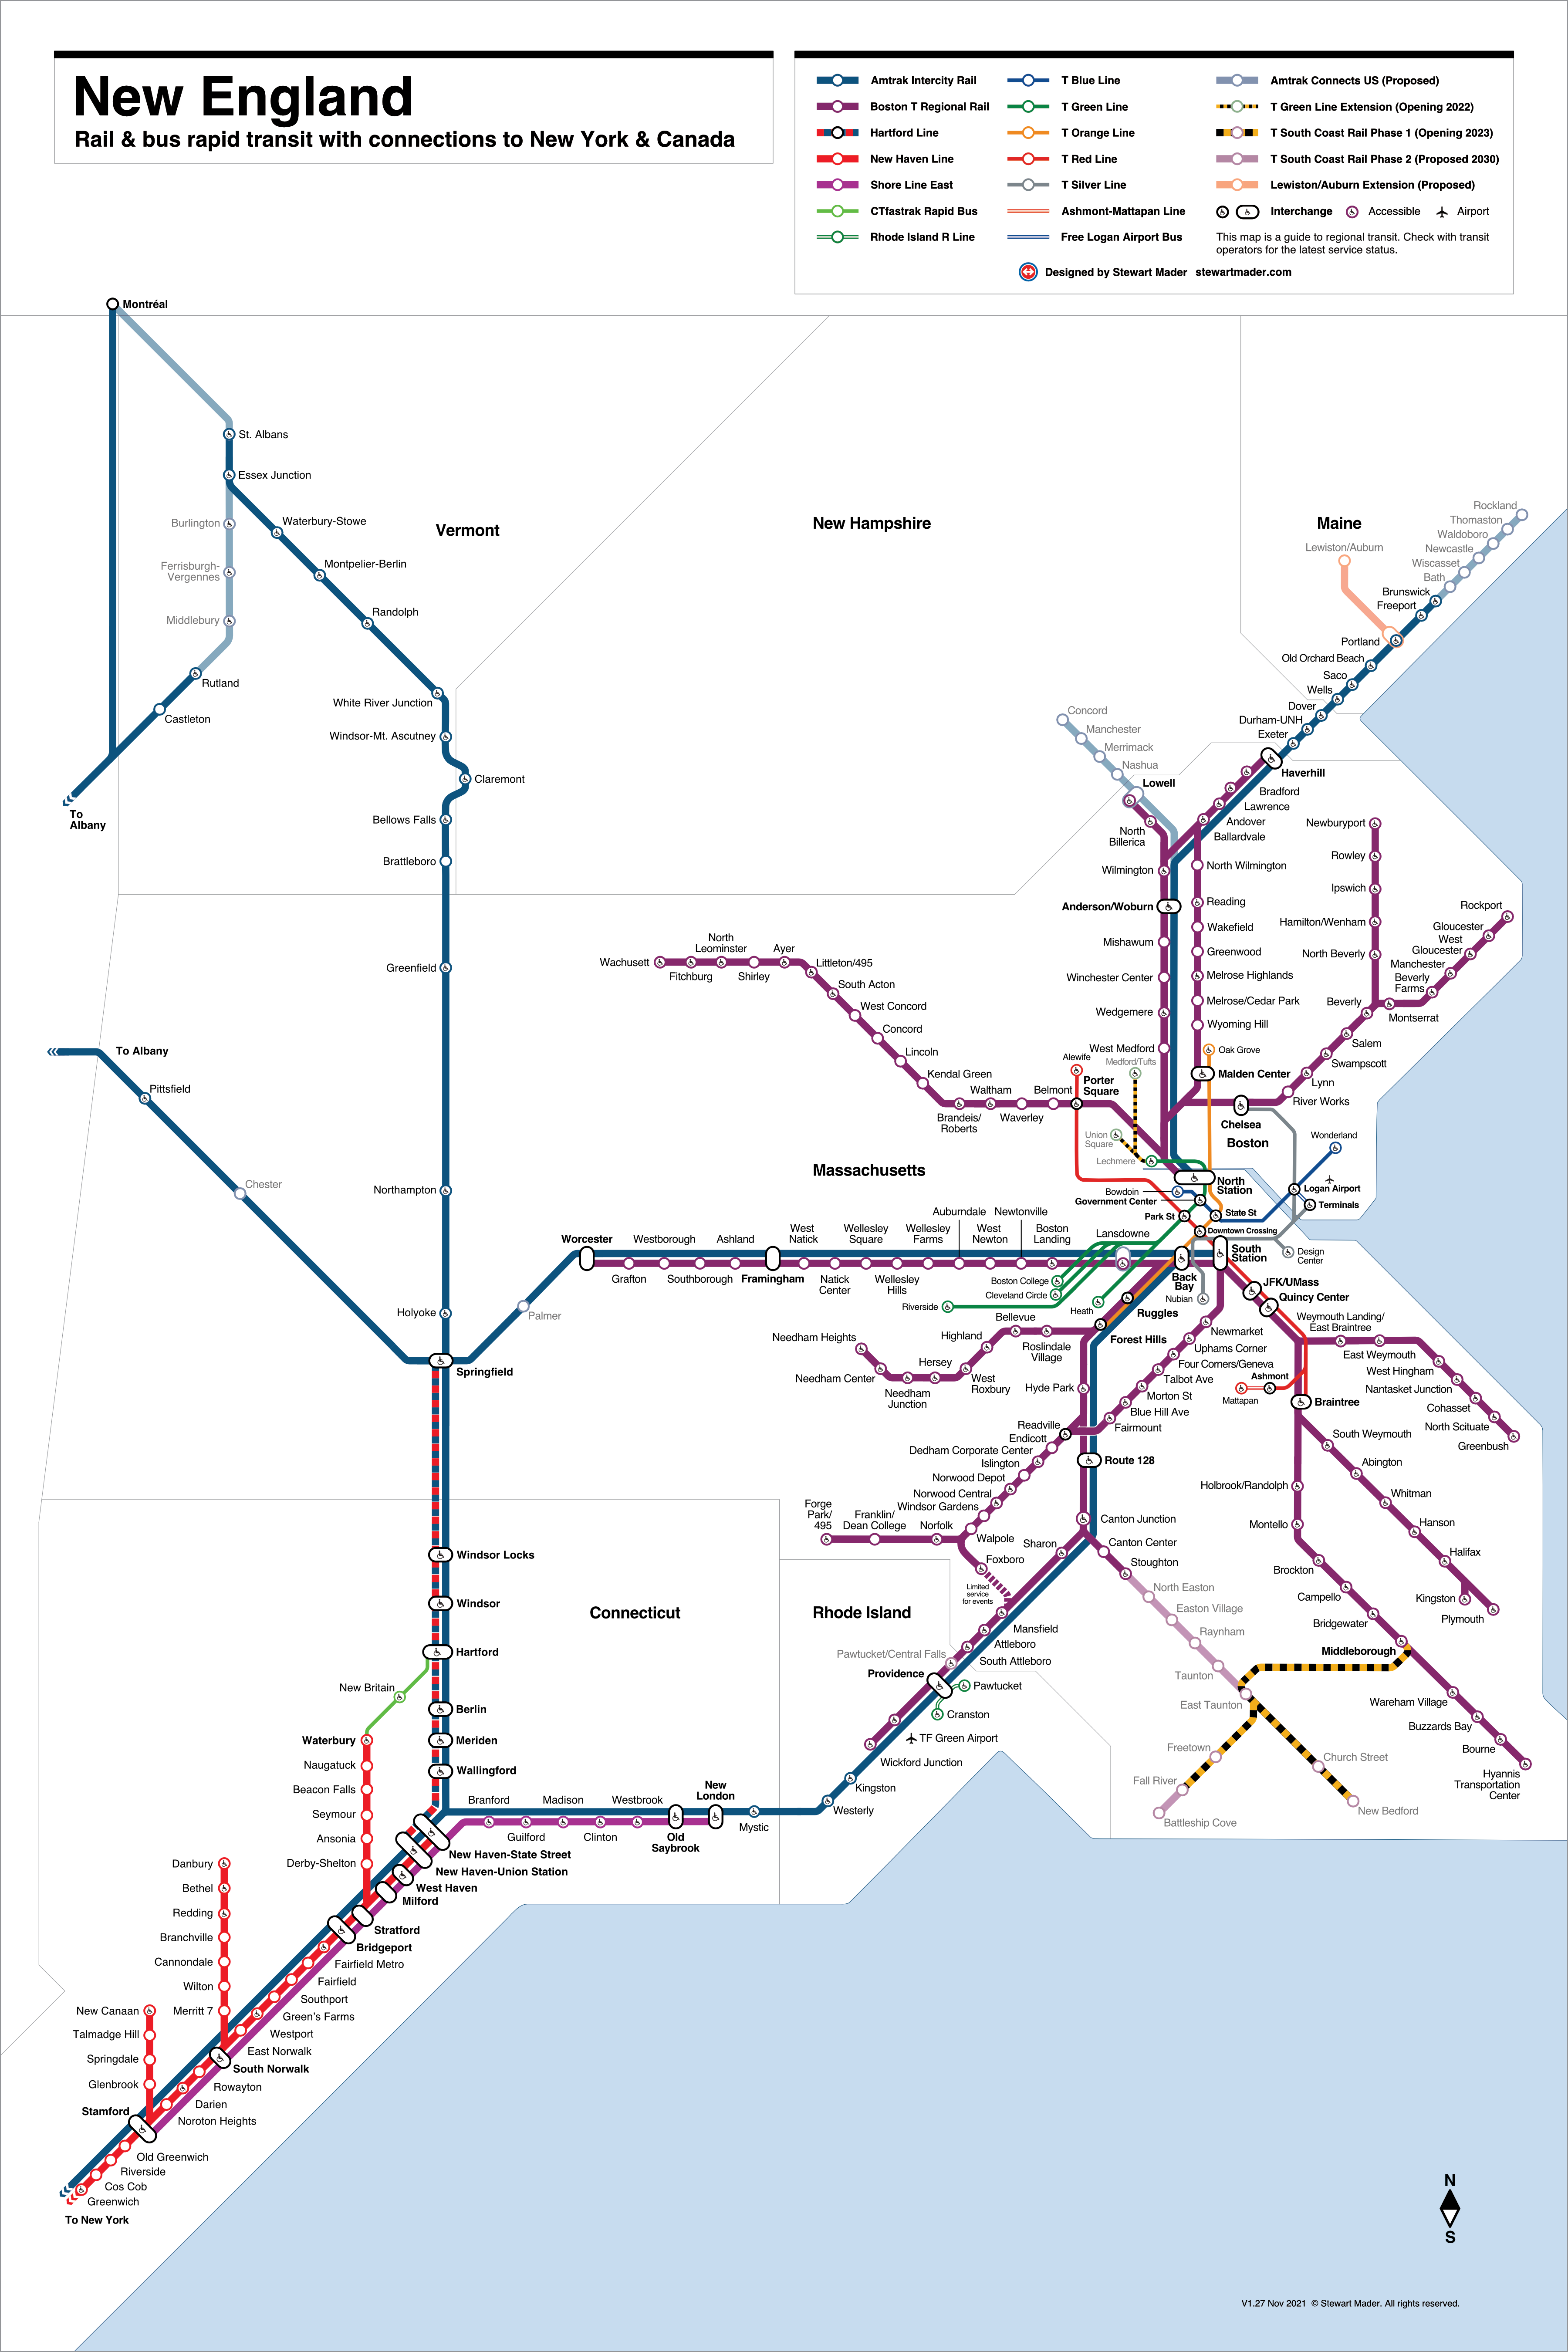 New England Transit Map - Comprehensive rail and bus rapid transit map for New England, with connections to New York and Canada, by Stewart Mader